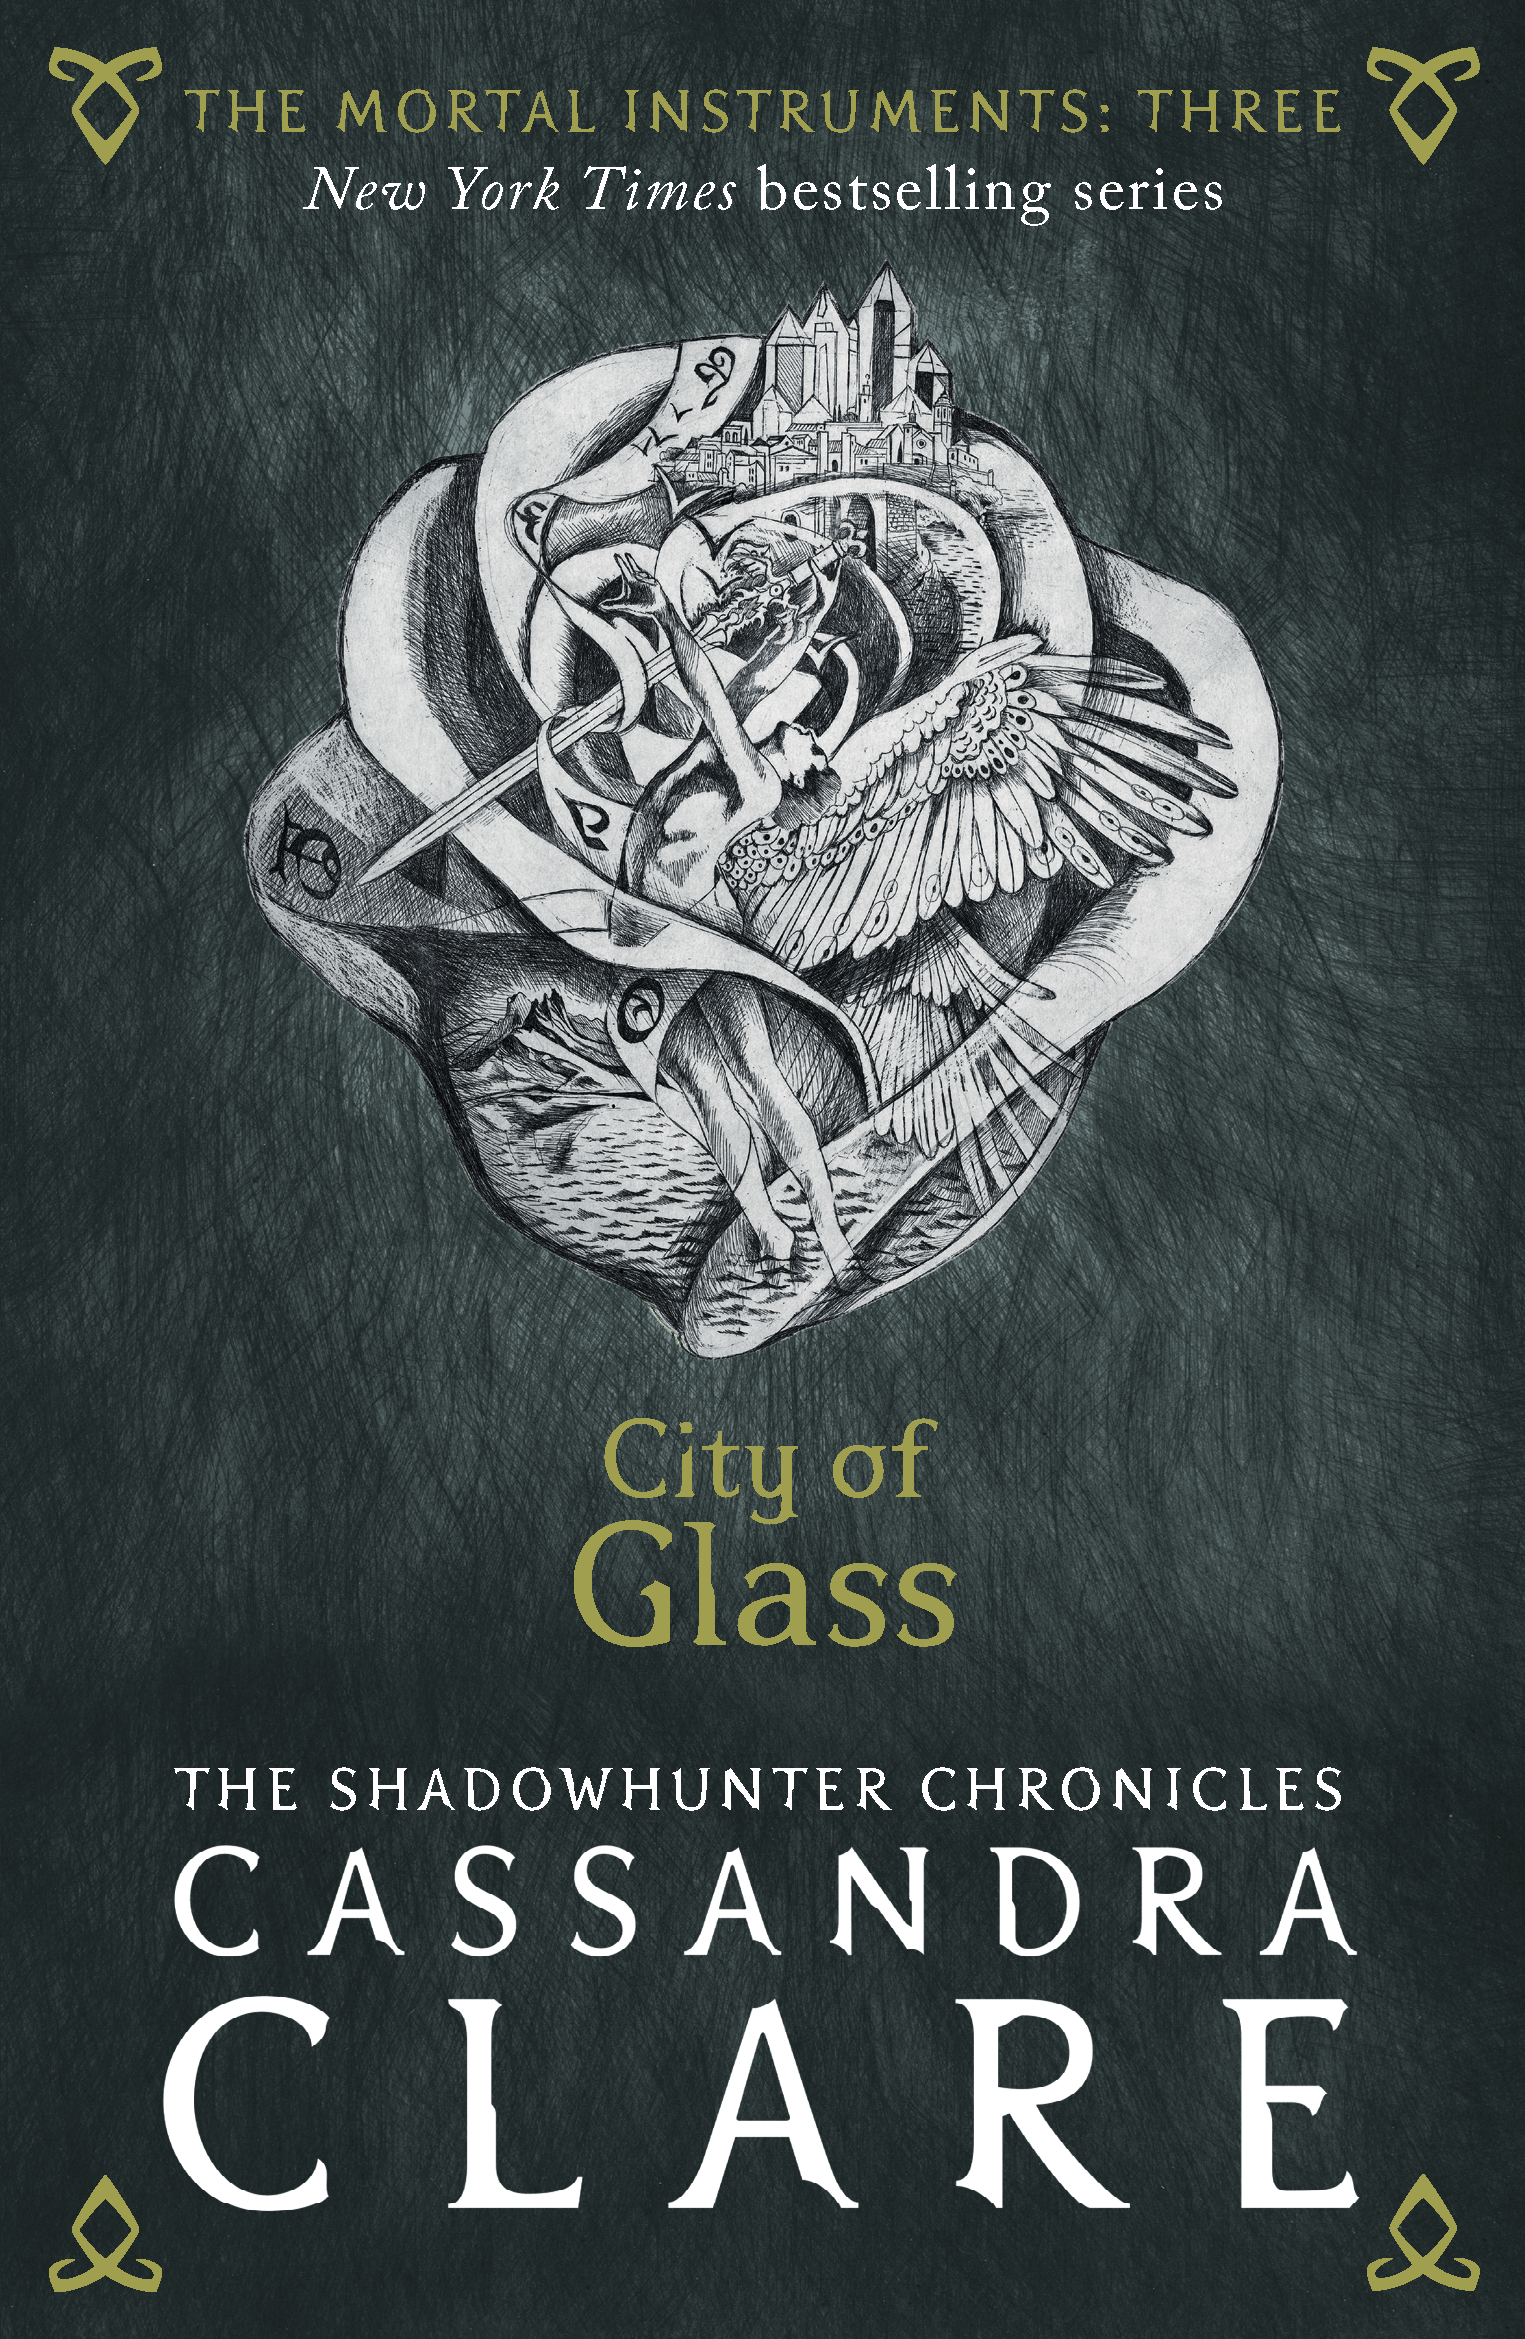 The-Mortal-Instruments-3-City-of-Glass